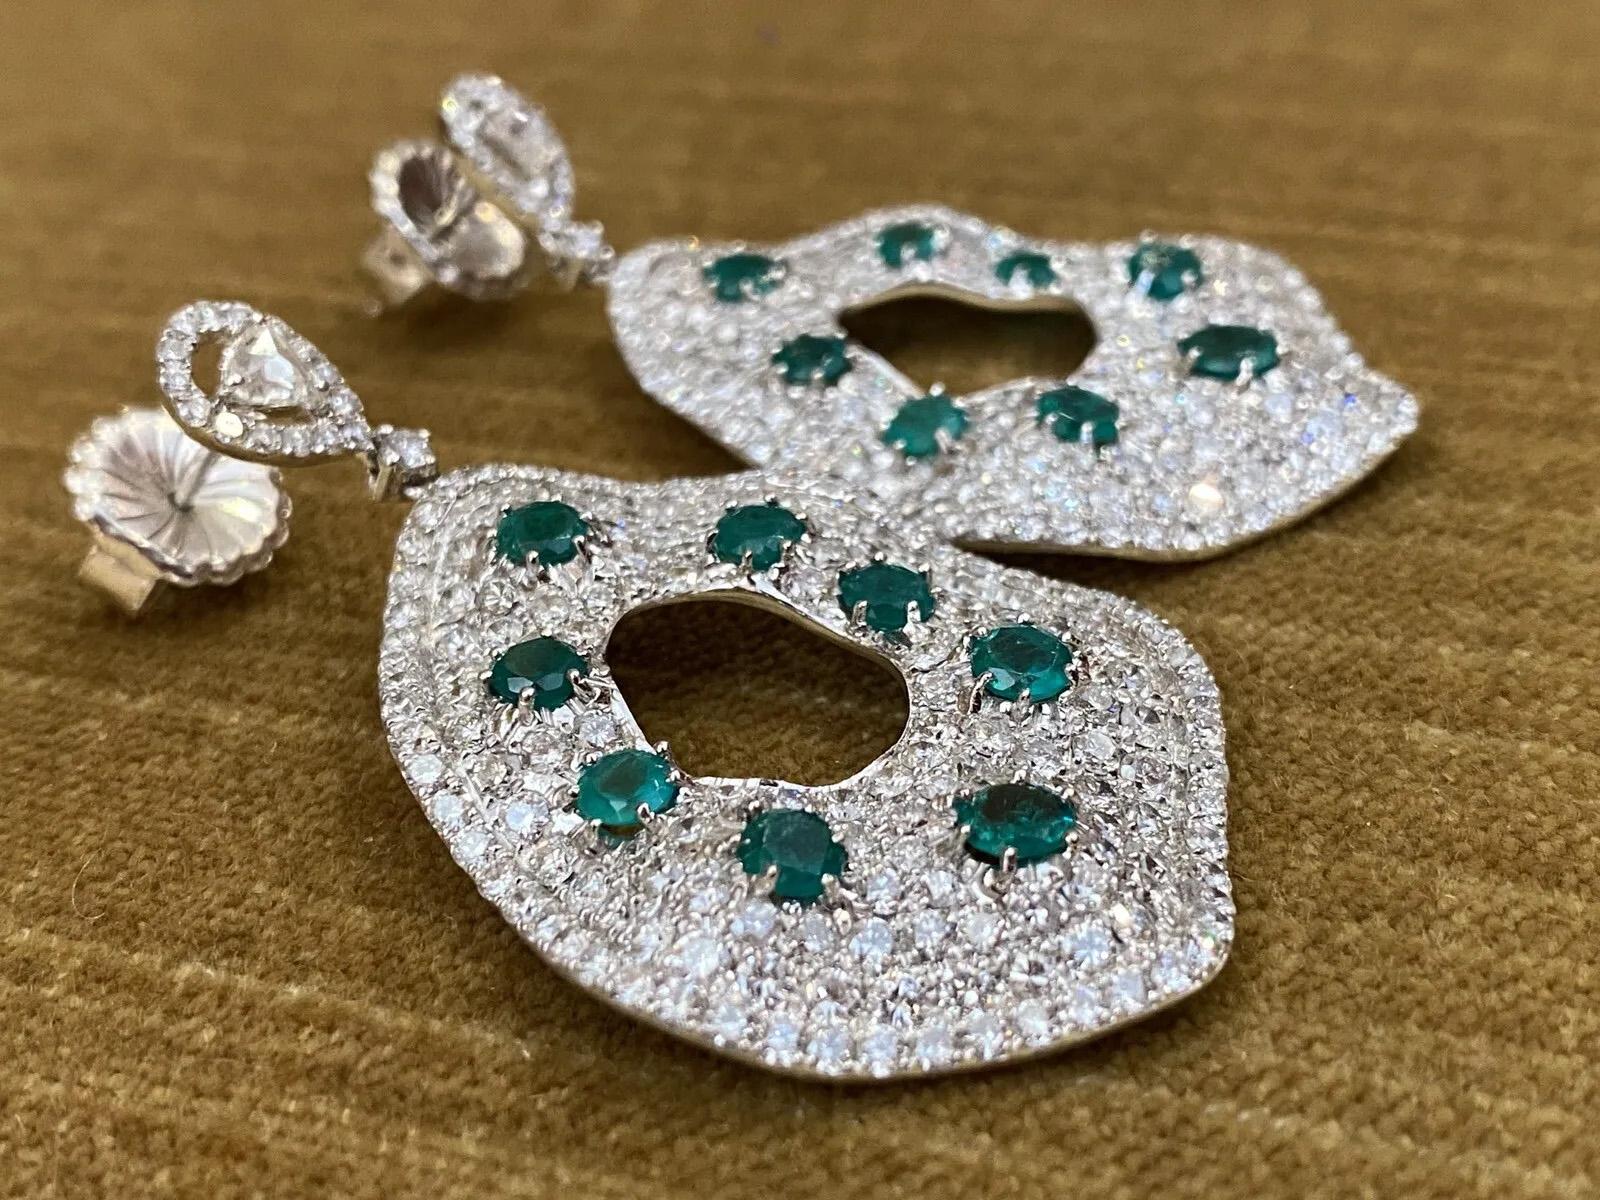 Large Pavé Diamond and Emerald Drop Earrings in 18k White Gold In Excellent Condition For Sale In La Jolla, CA